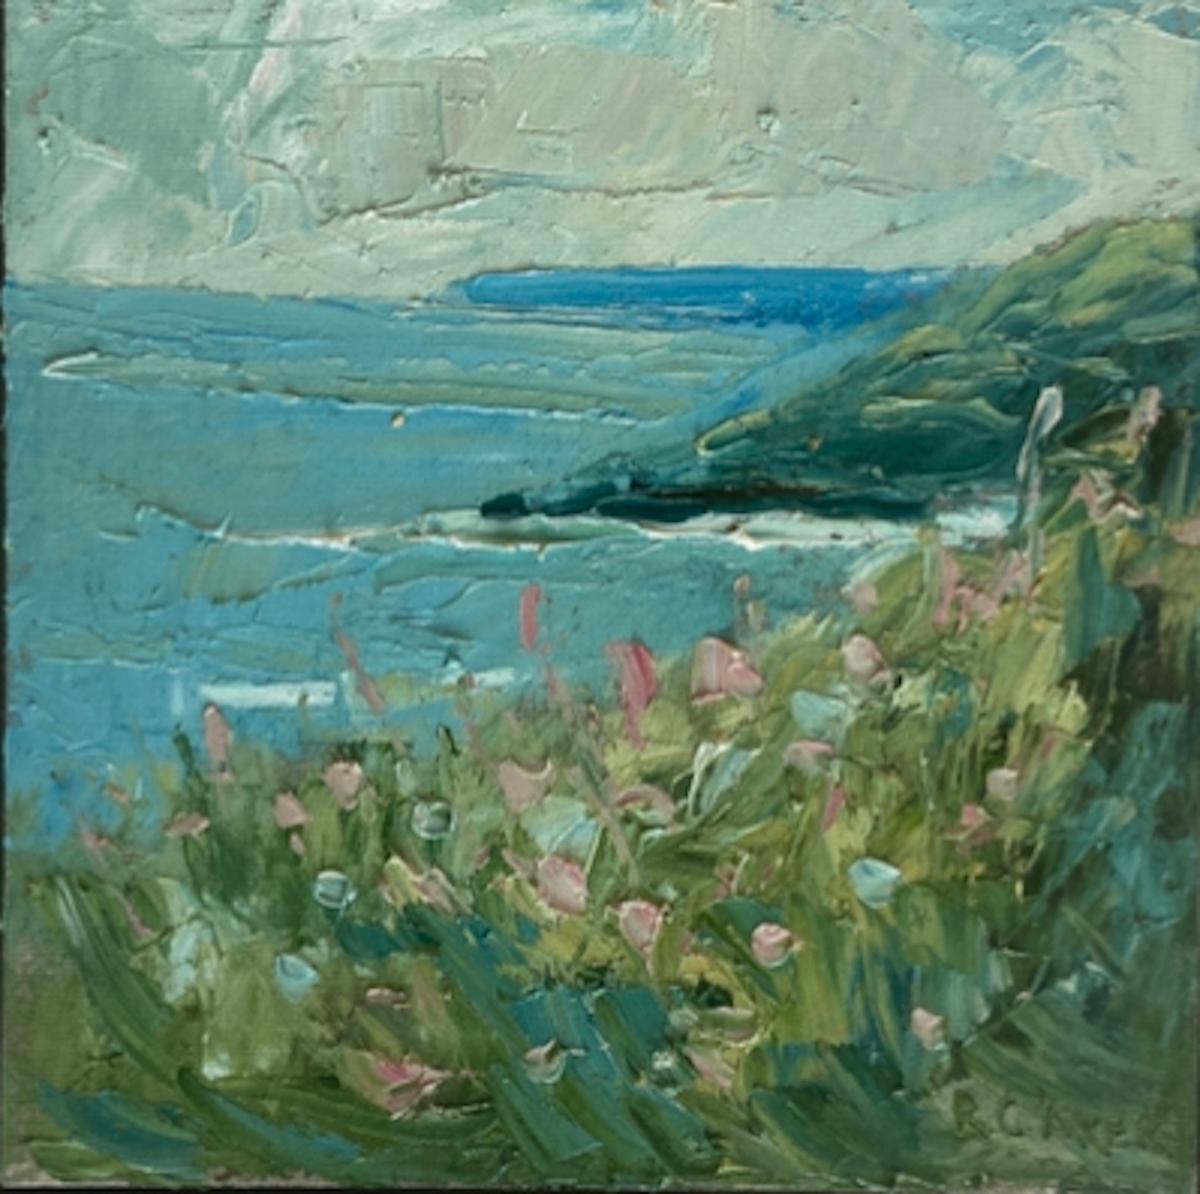 Cornish coast by Rupert Aker [2022]
original and hand

Oil on canvas

Image size: H:30 cm x W:30 cm

Complete Size of Unframed Work: H:30 cm x W:30 cm x D:2cm

Frame Size: H:33 cm x W:33 cm x D:3cm

Sold Framed

Please note that insitu images are